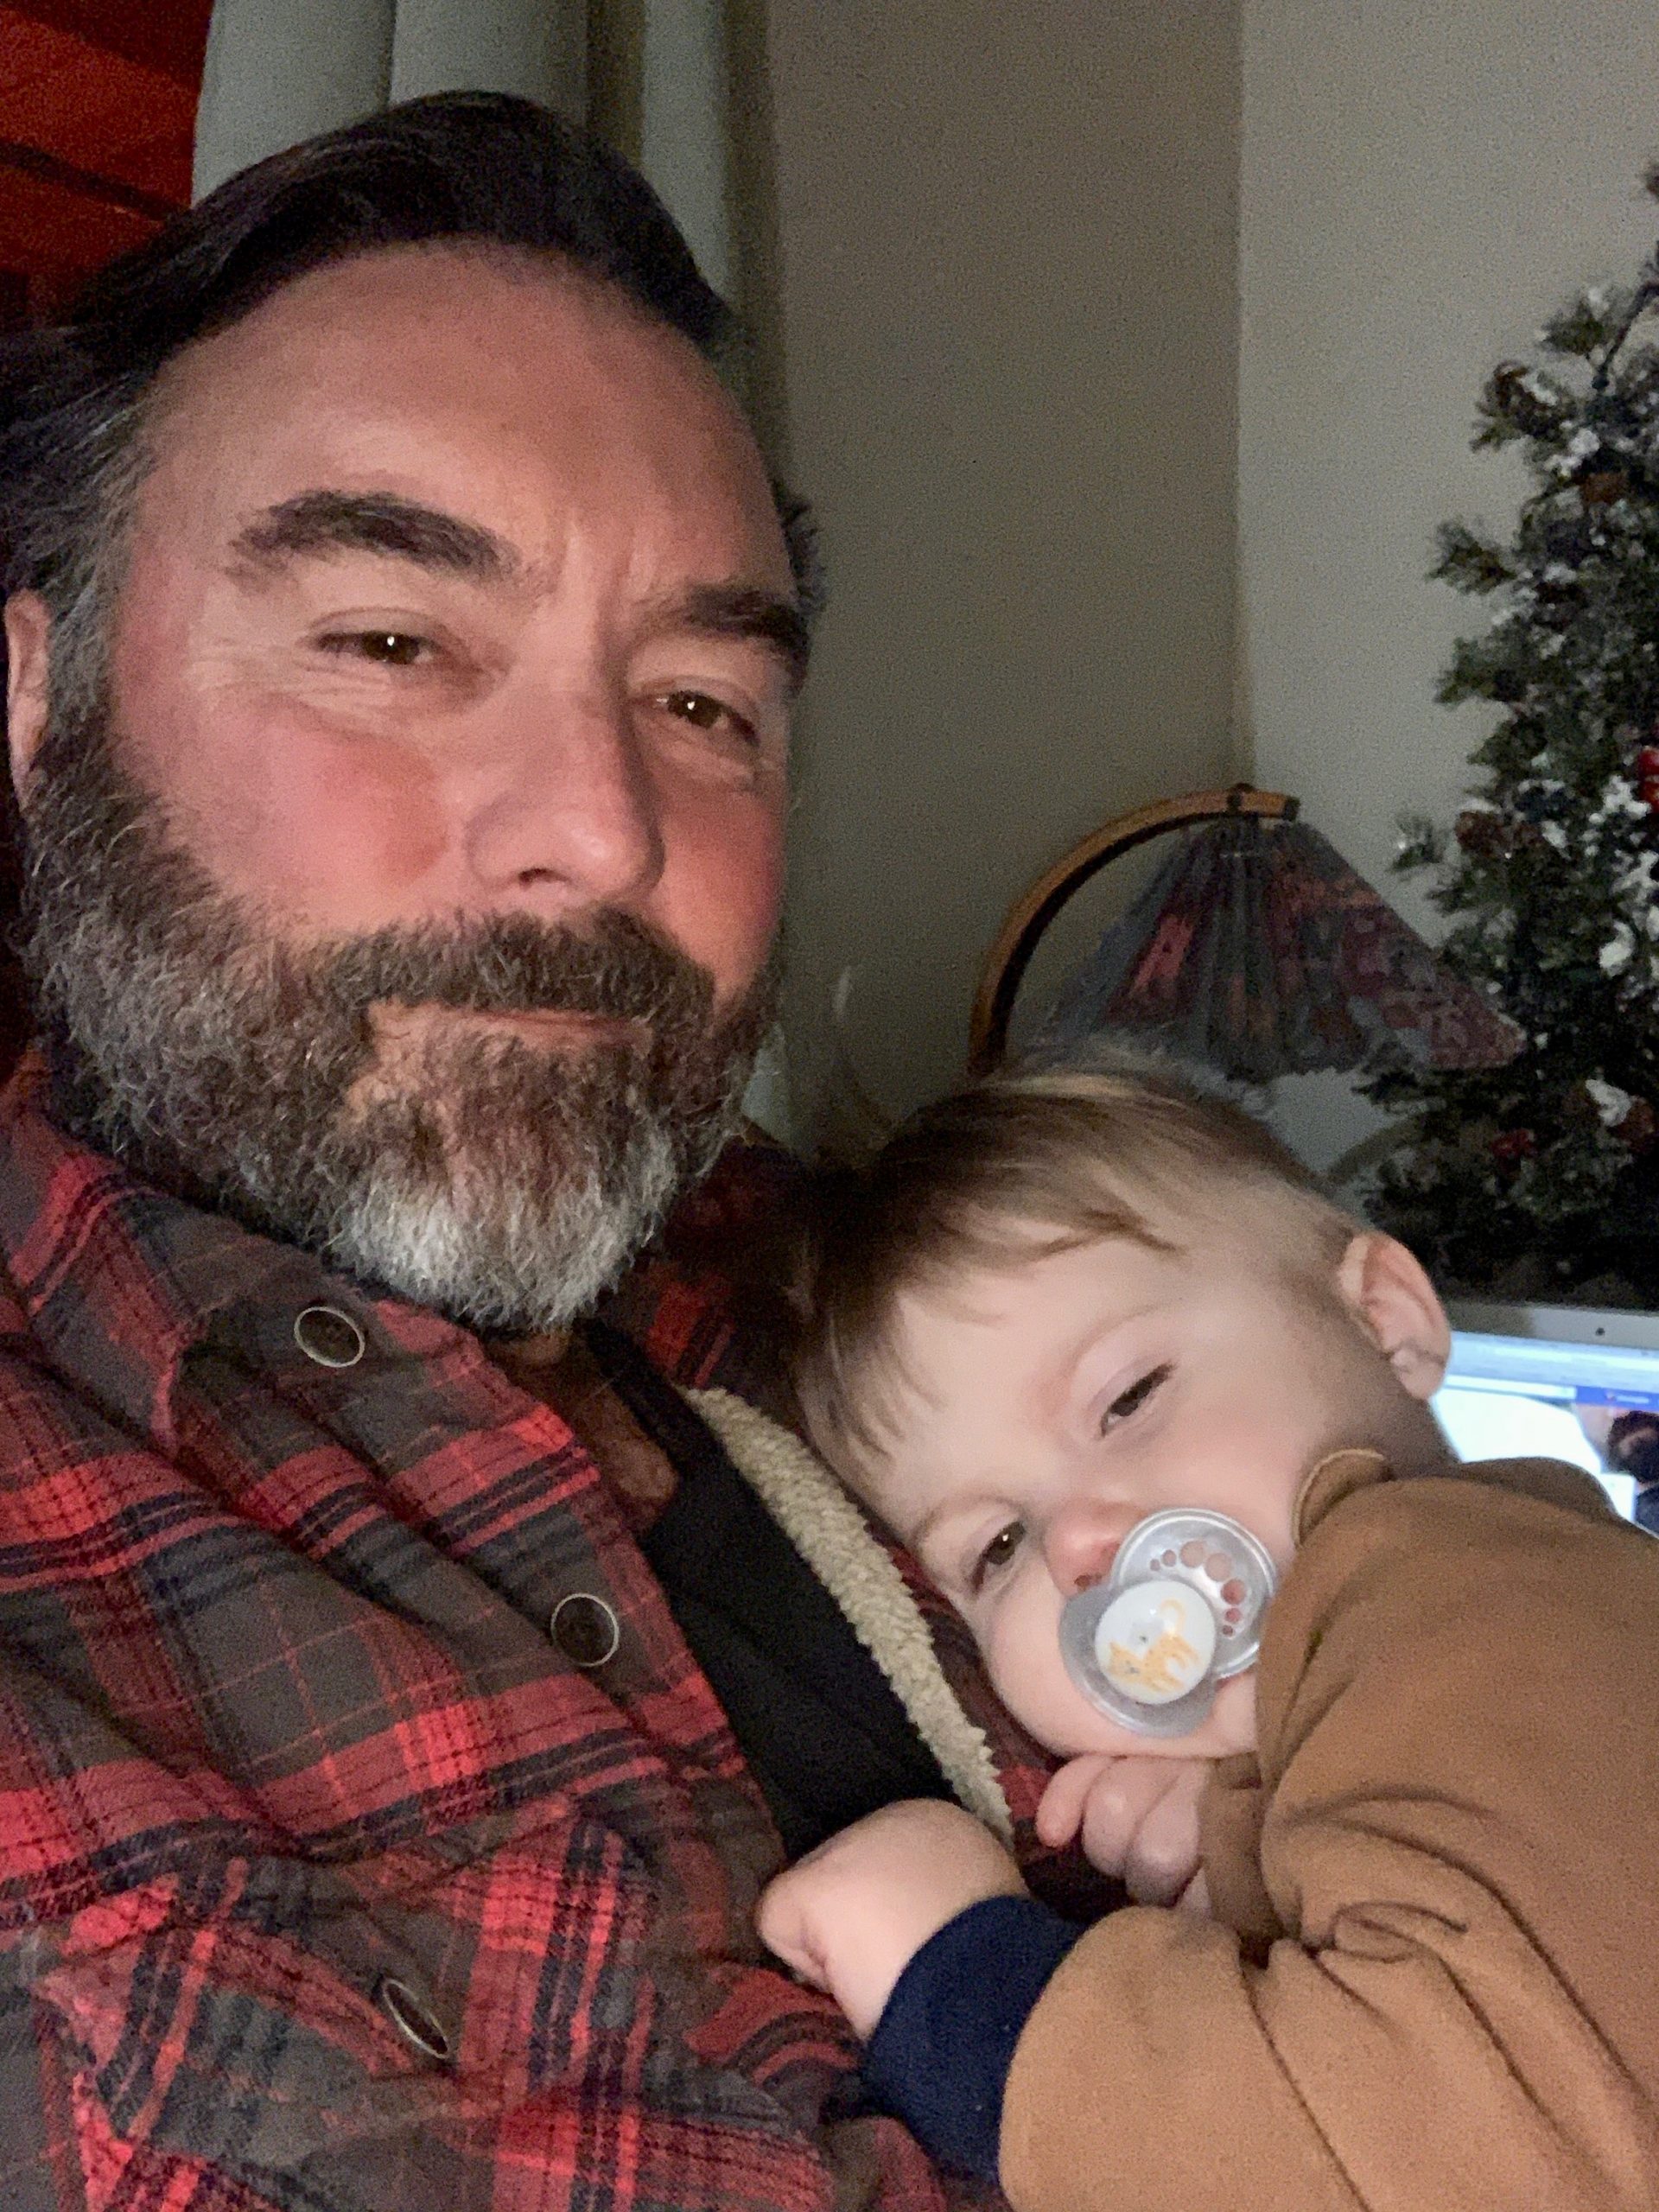 Although Julie was working, I had an unexpected New Years cuddle from Liam. He was very tired and sad, and it took me over an hour to get him back to sleep. As a grandparent, I guess I’m supposed to say I don’t miss this. But, the truth is, I know it won’t be long until I won’t have it, and I’ll miss it once again.